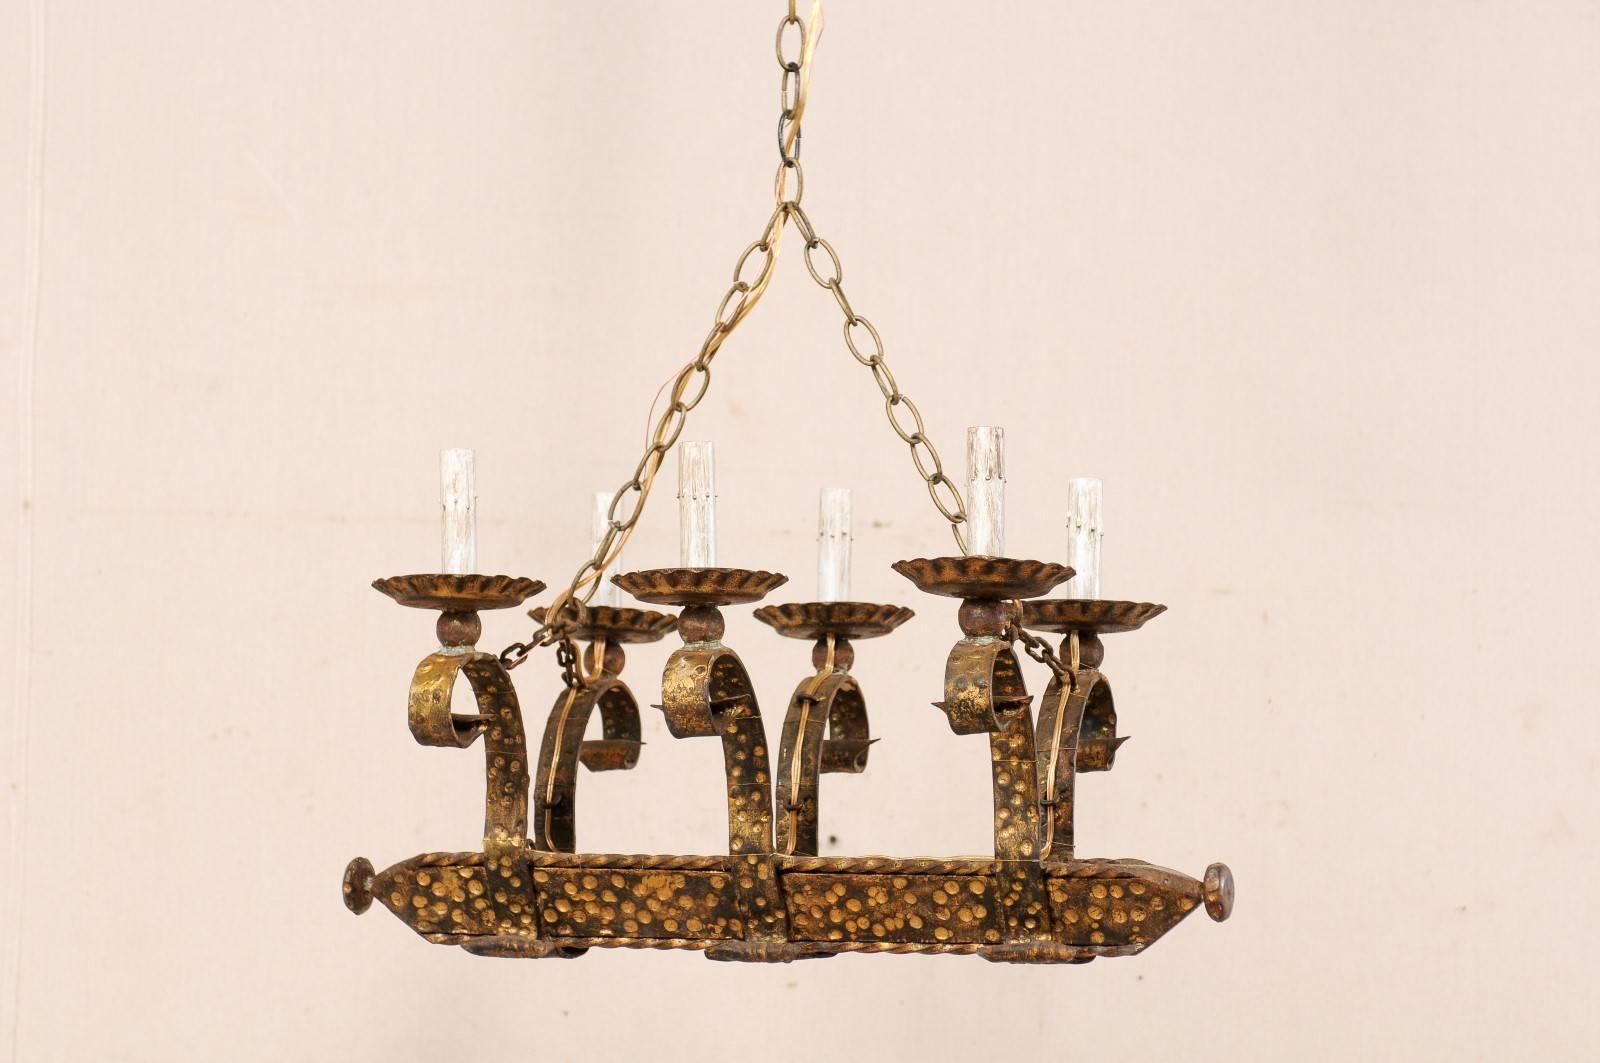 French Six-Light Forged and Hammered Iron Chandelier in Gold Colored Finish For Sale 3